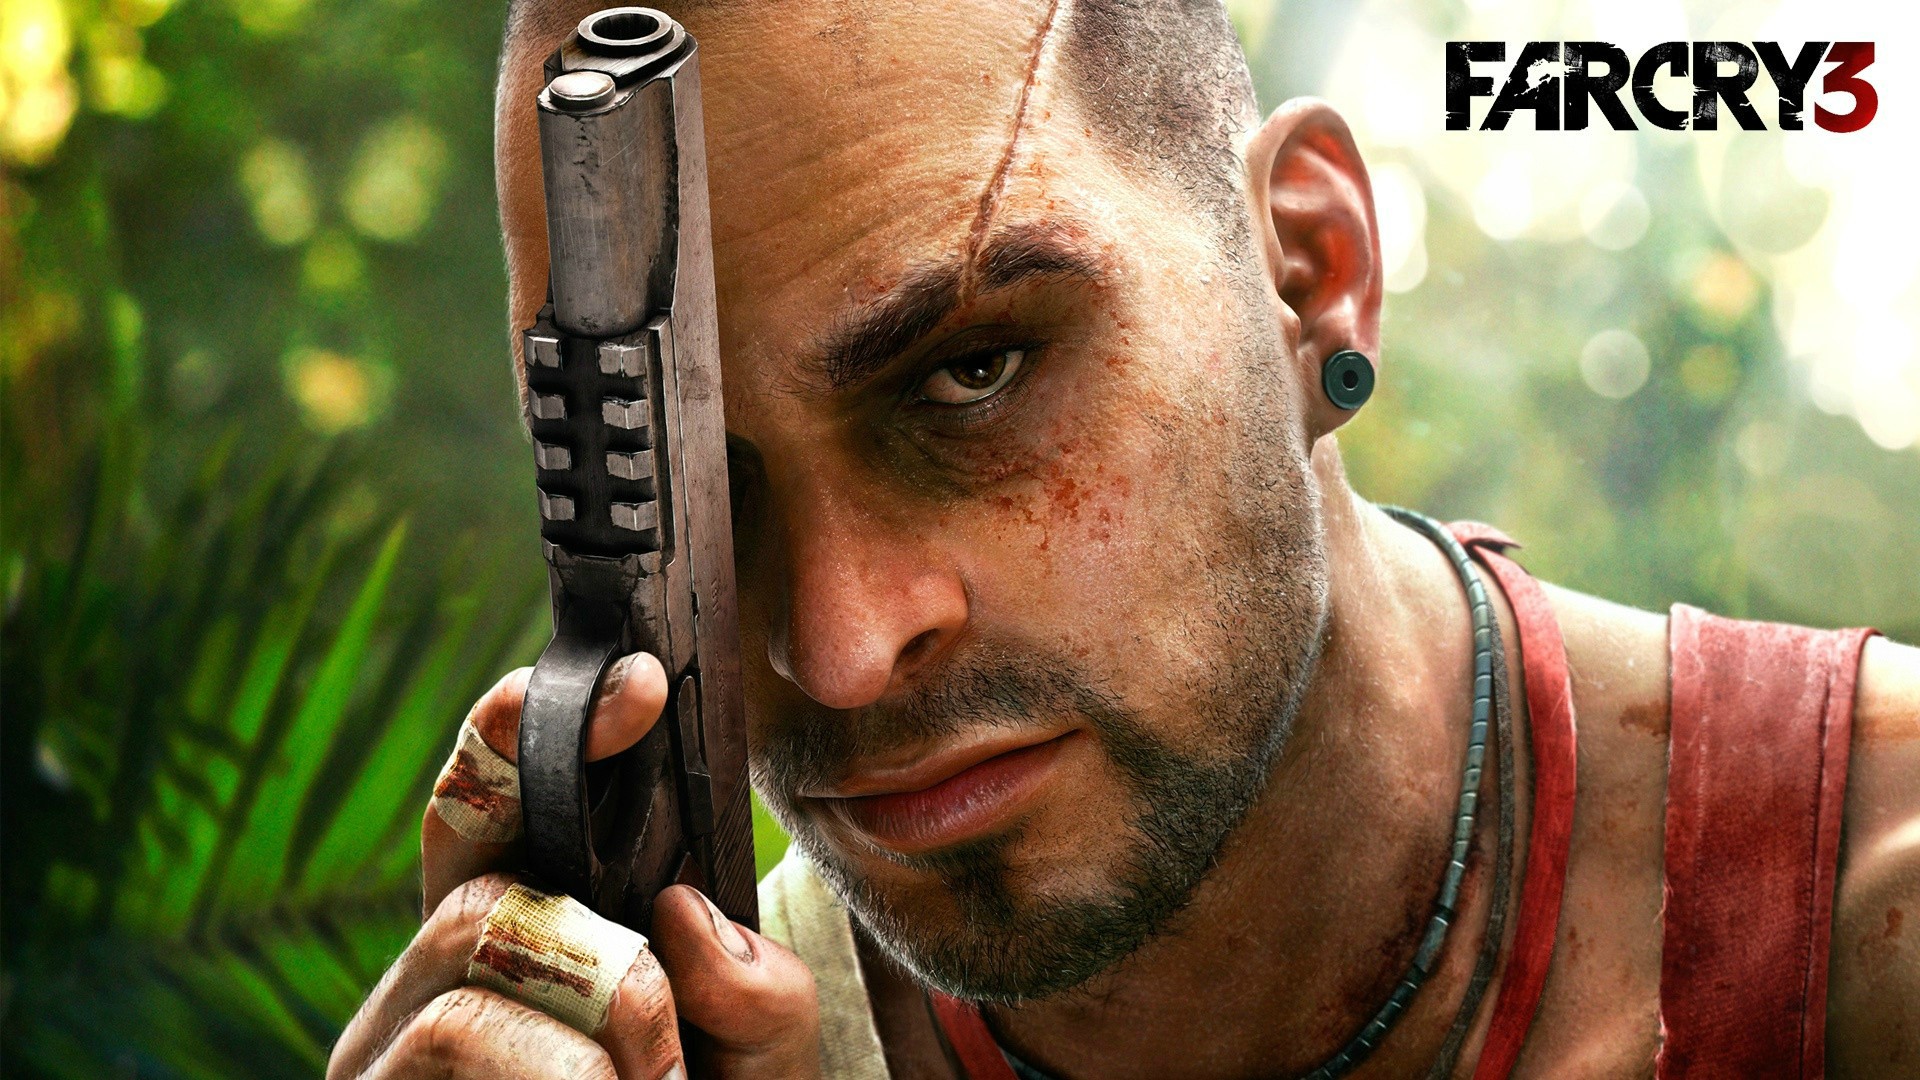 Gaming wallpaper games farcry 3